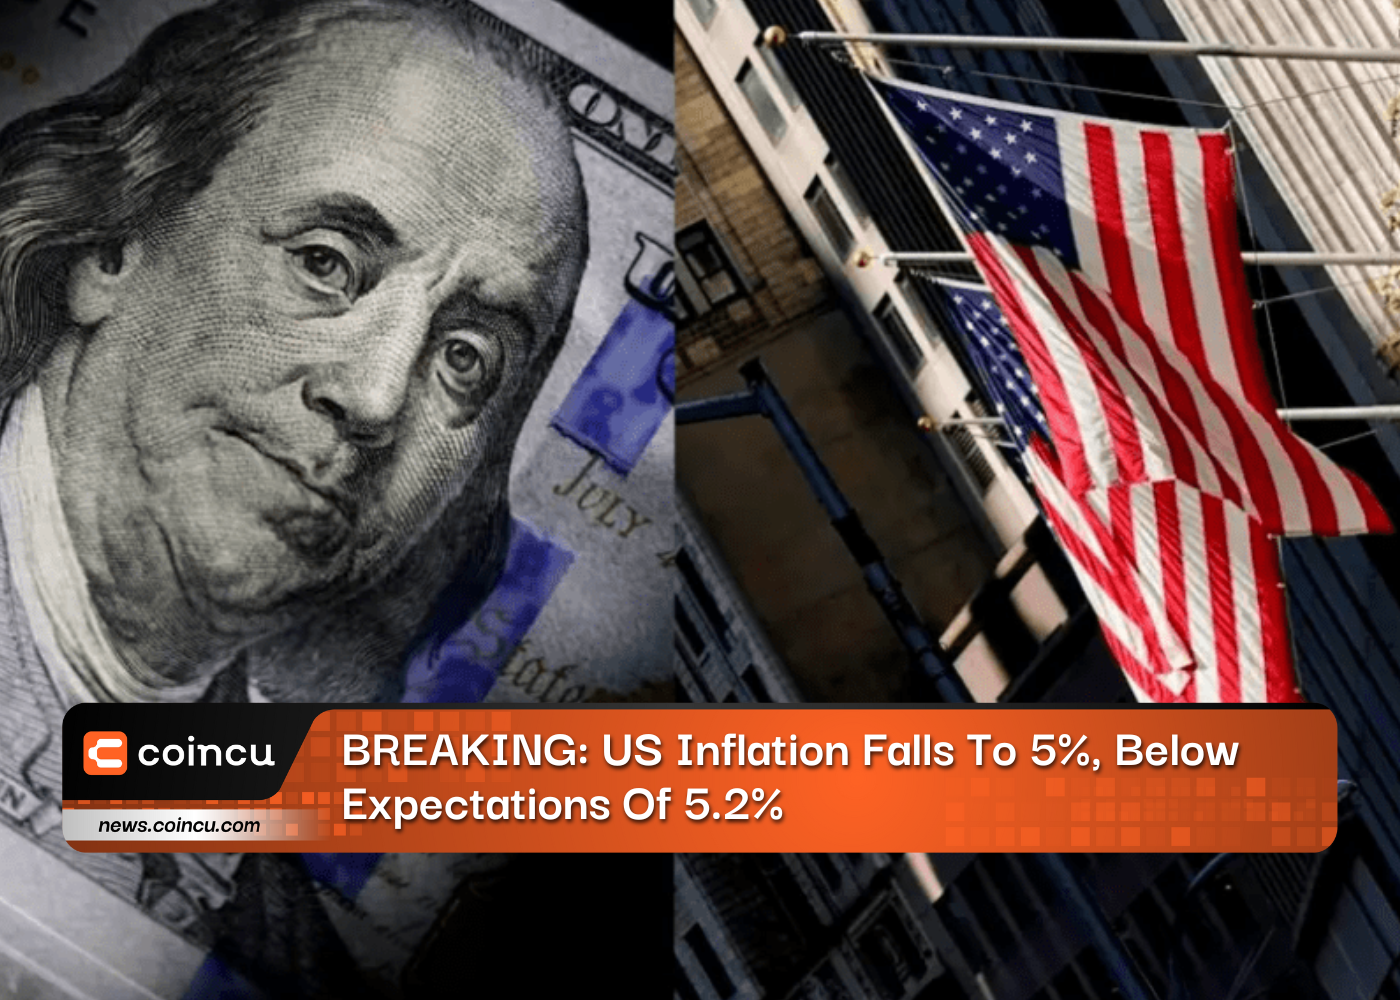 BREAKING: US Inflation Falls To 5%, Below Expectations Of 5.2%